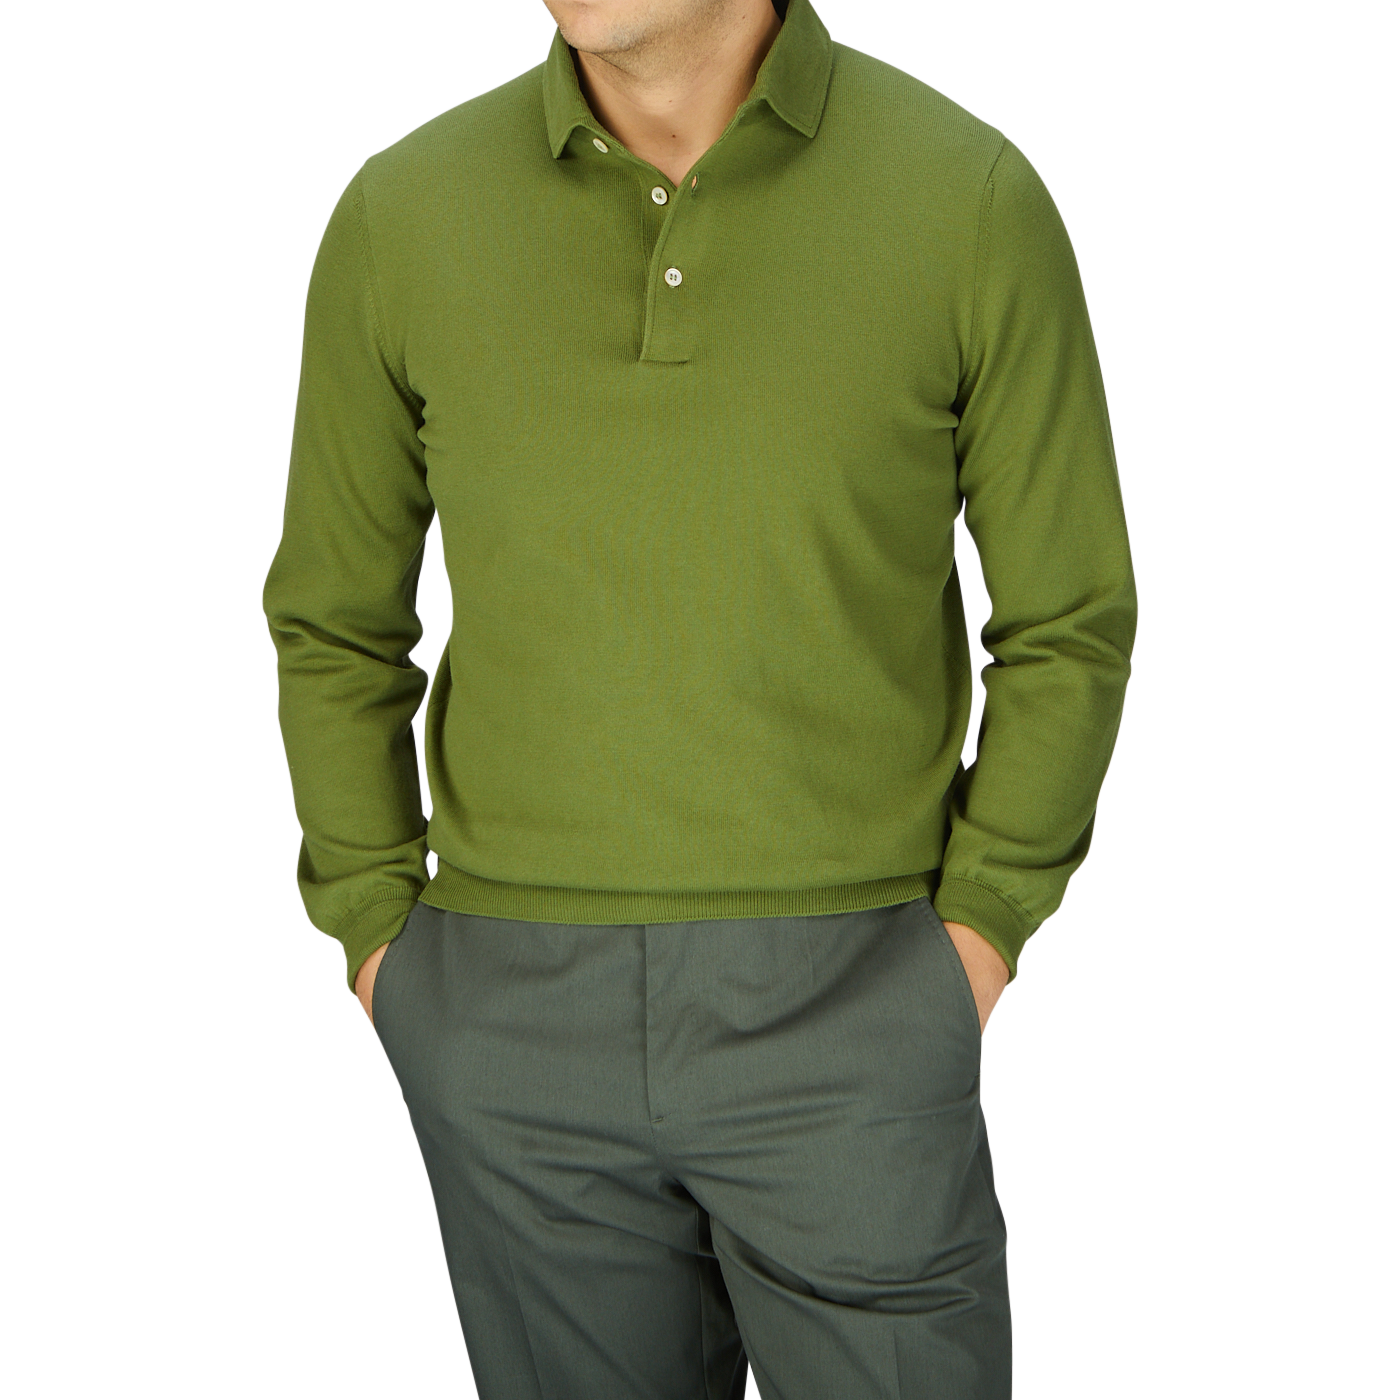 Man in a Gran Sasso Green Organic Cotton LS Polo Shirt and gray trousers against a light gray background.